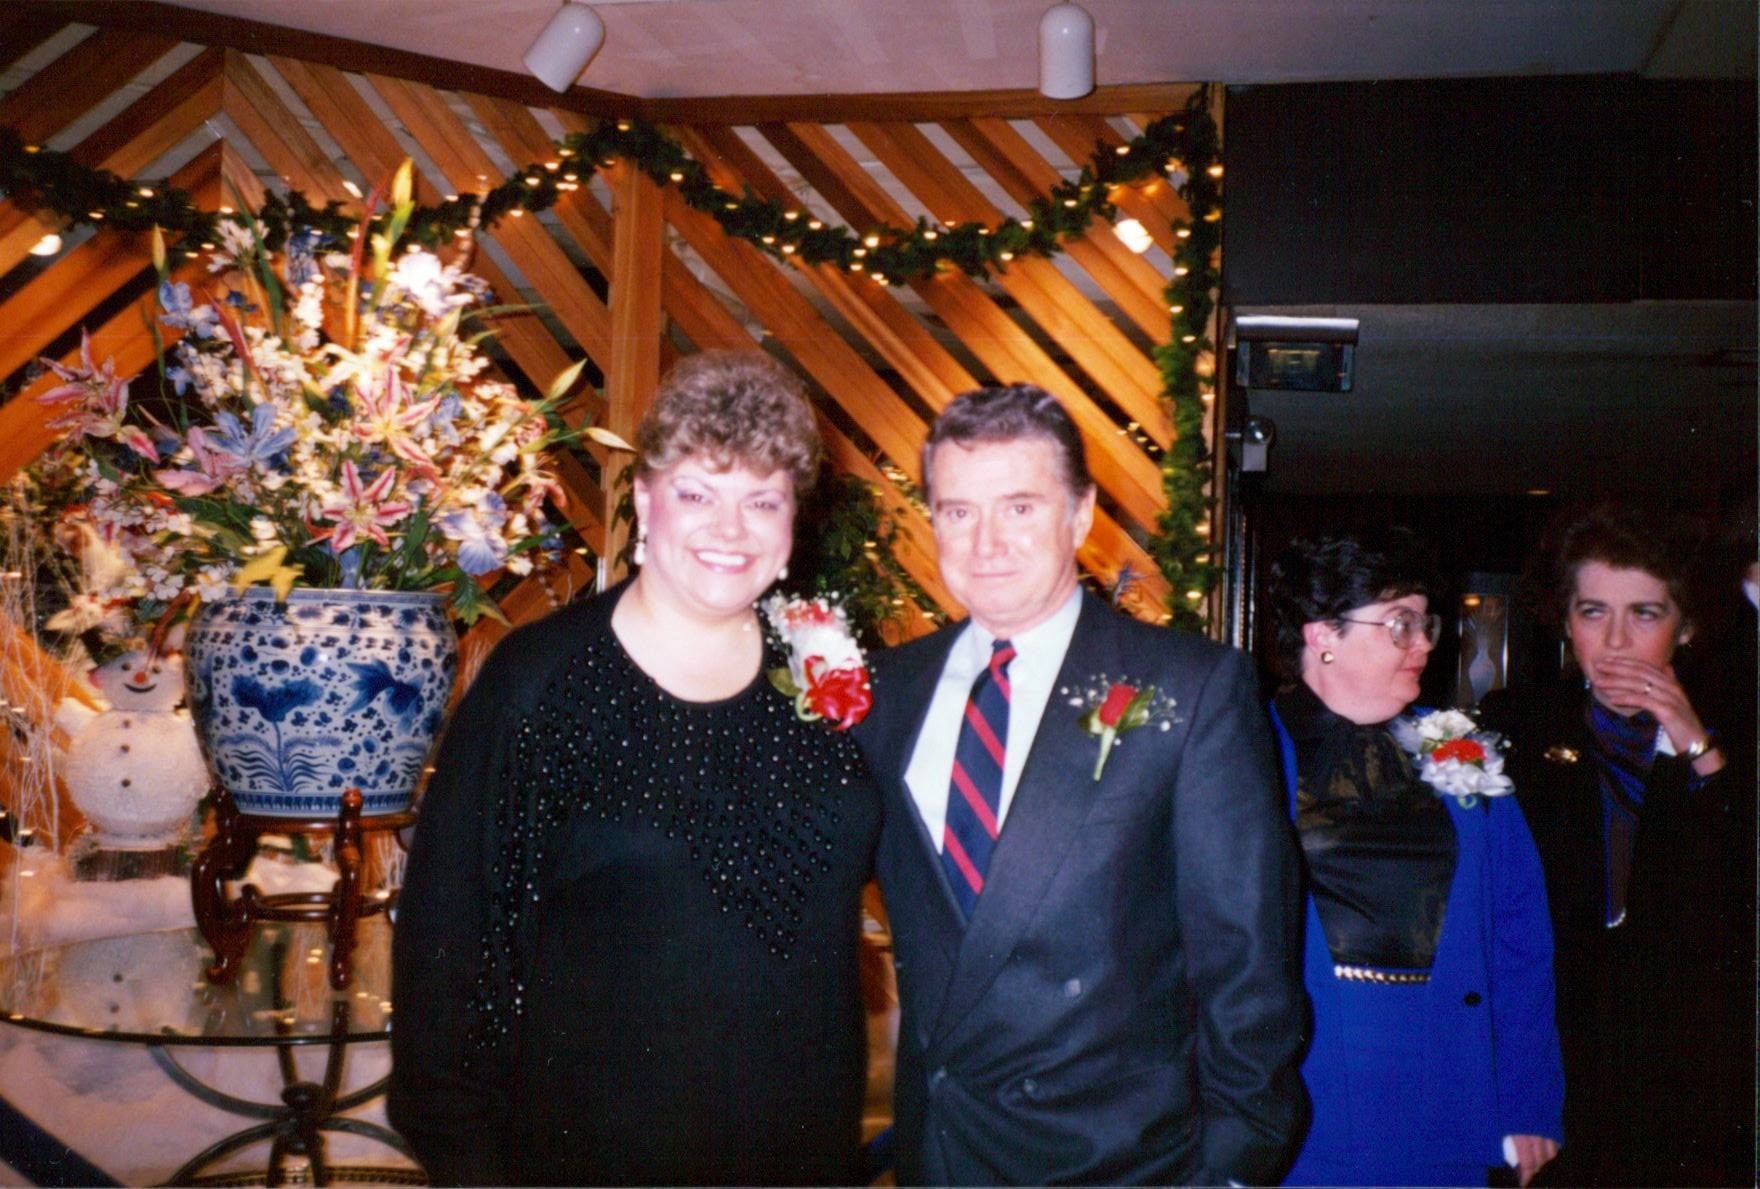 Mascia with Regis Philbin, who she contracted to speak at a fundraiser for the Nassau County Library Association in 1989.